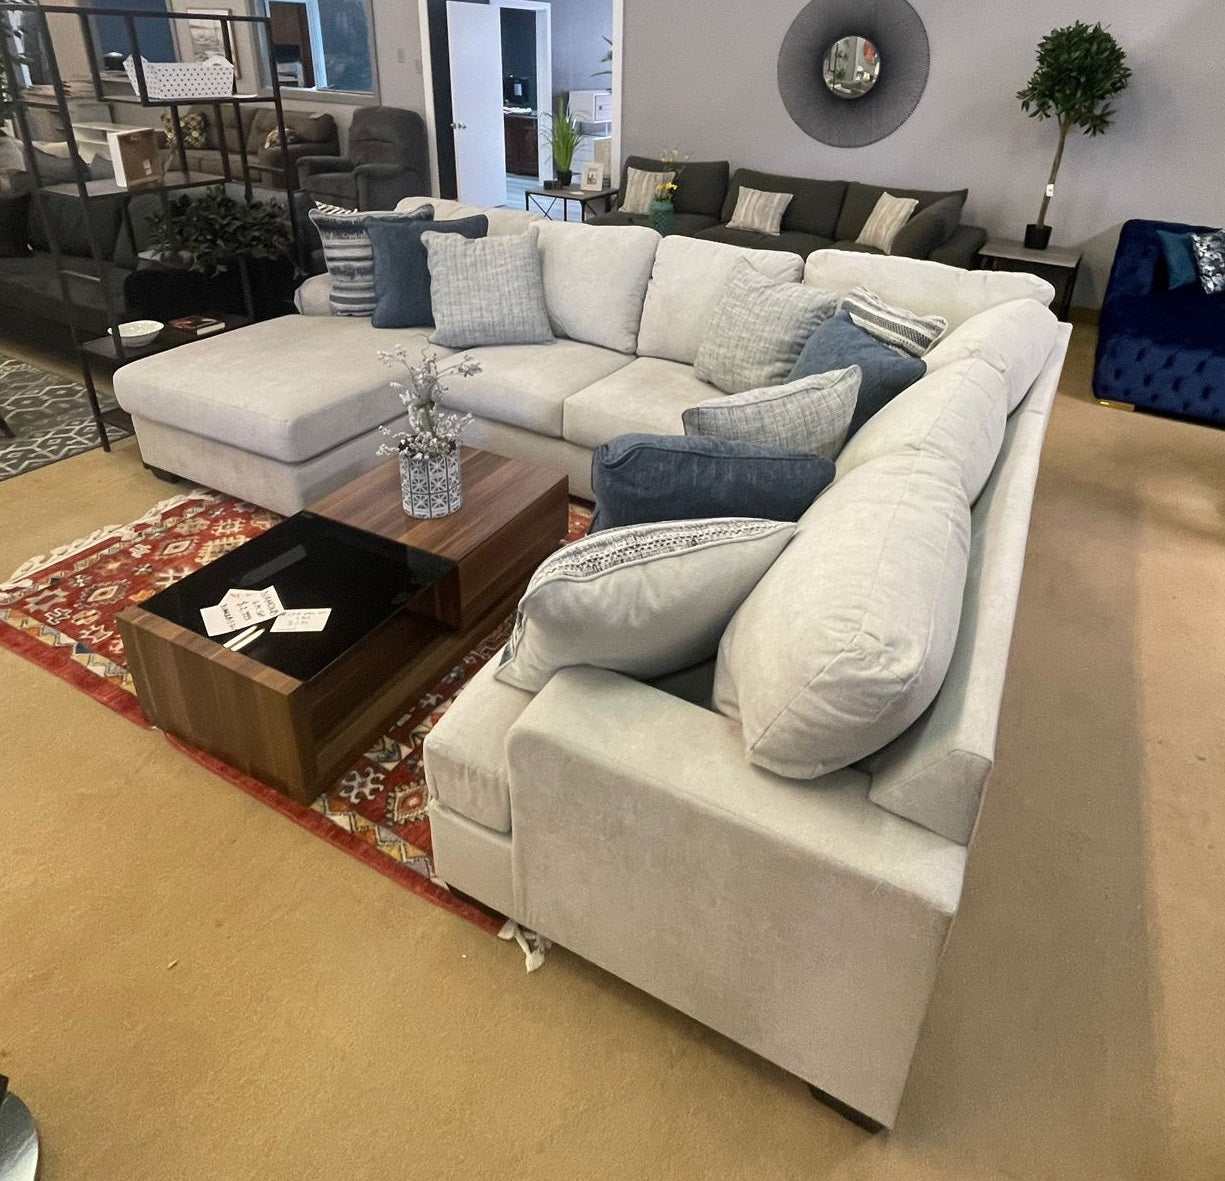 Lowder Stone 4pc Sectional Sofa w/ LAF Chaise